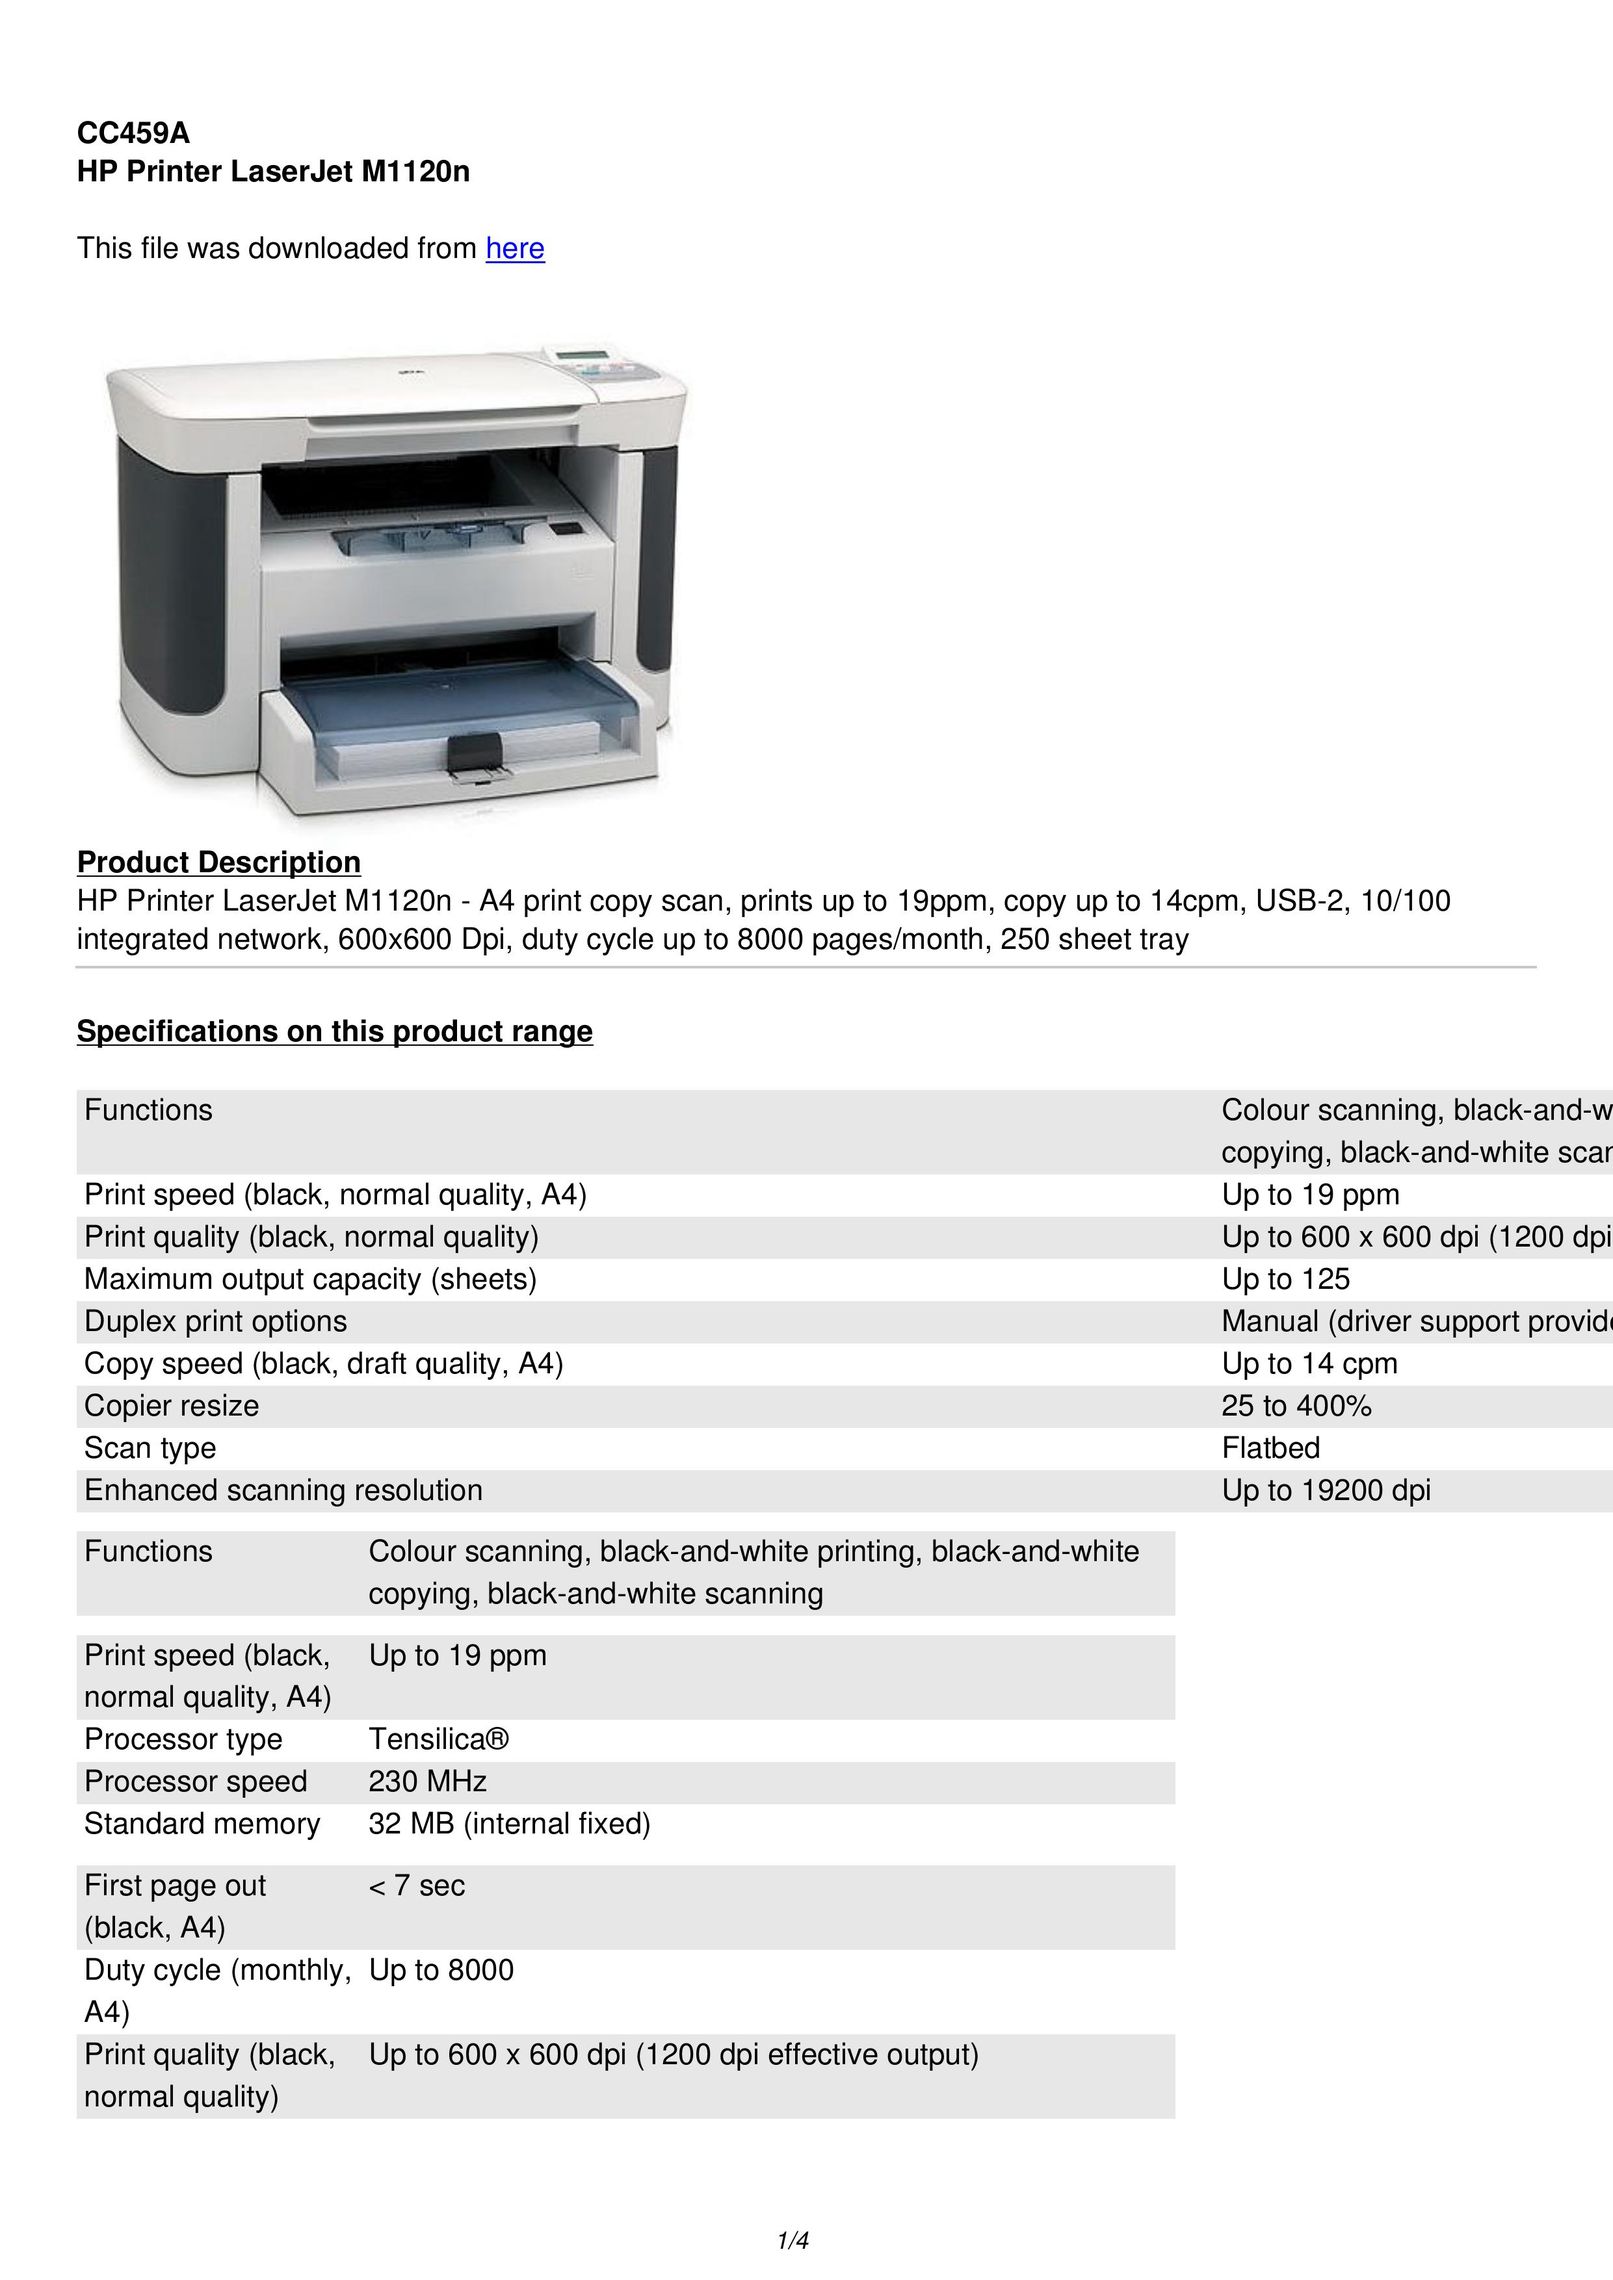 AMCC M1120N All in One Printer User Manual (Page 1)